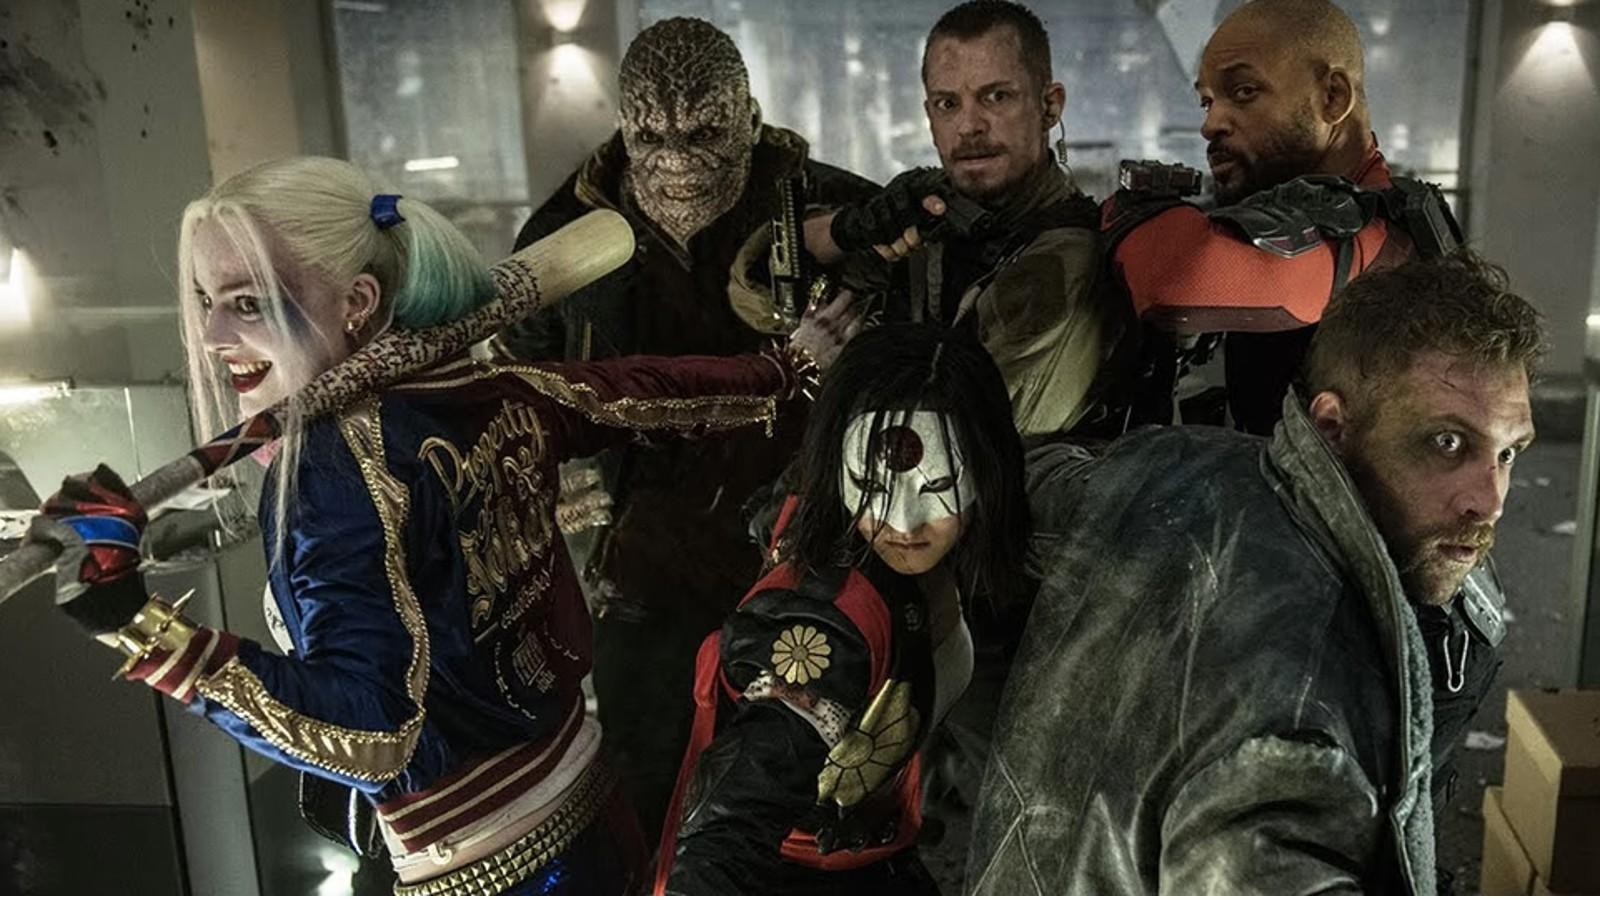 The cast of 2016's Suicide Squad